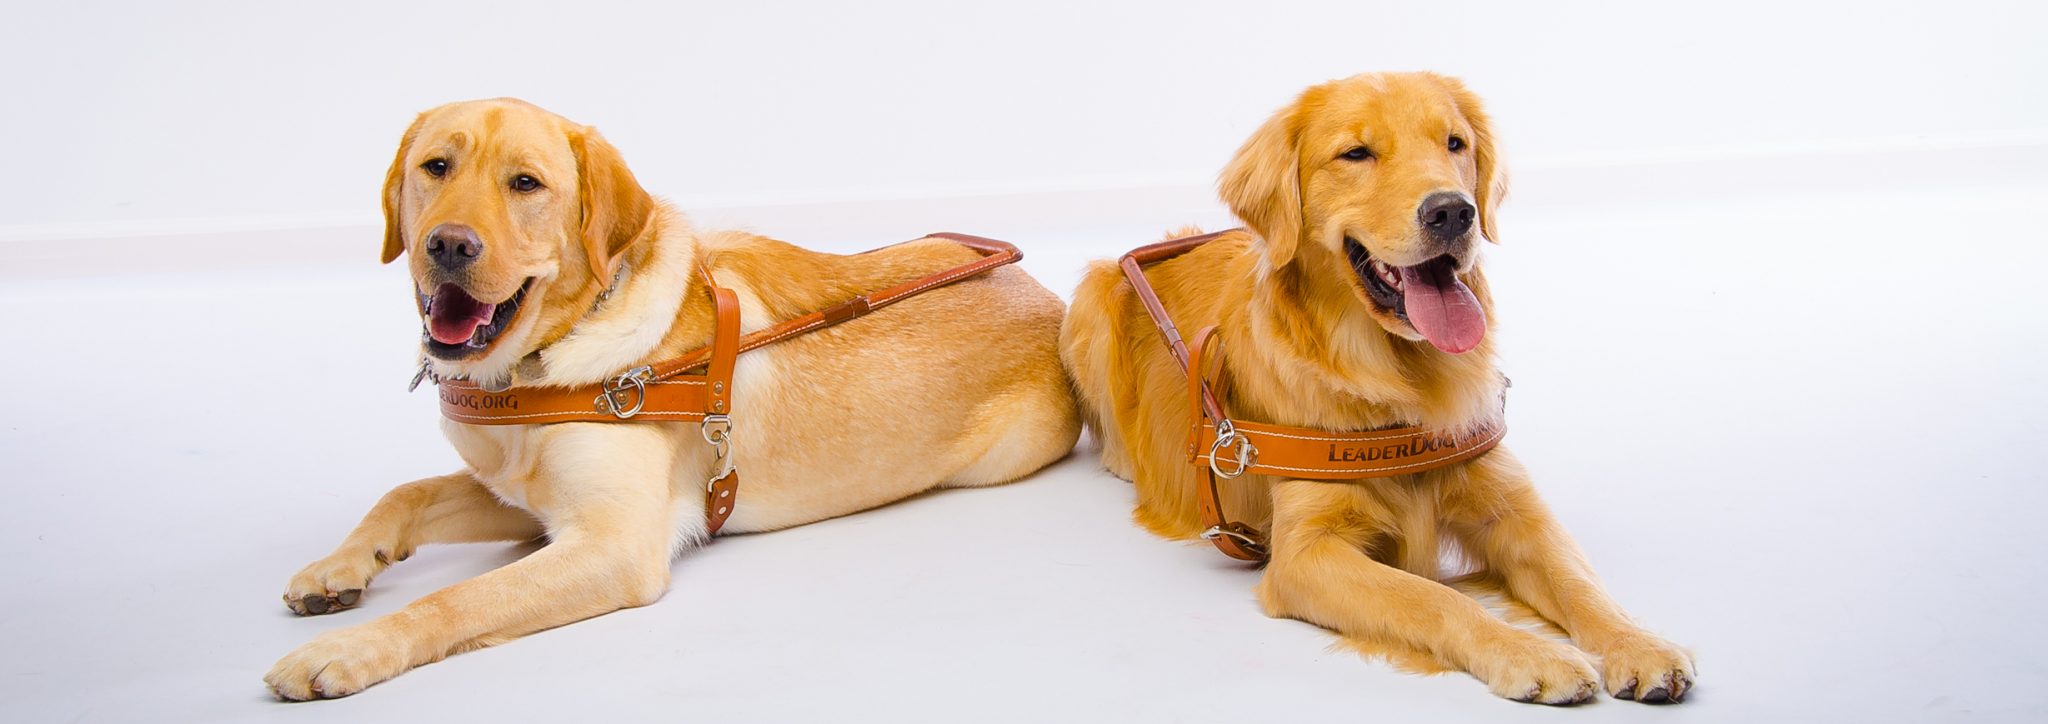 Apply for Guide Dog Training Leader Dogs for the Blind